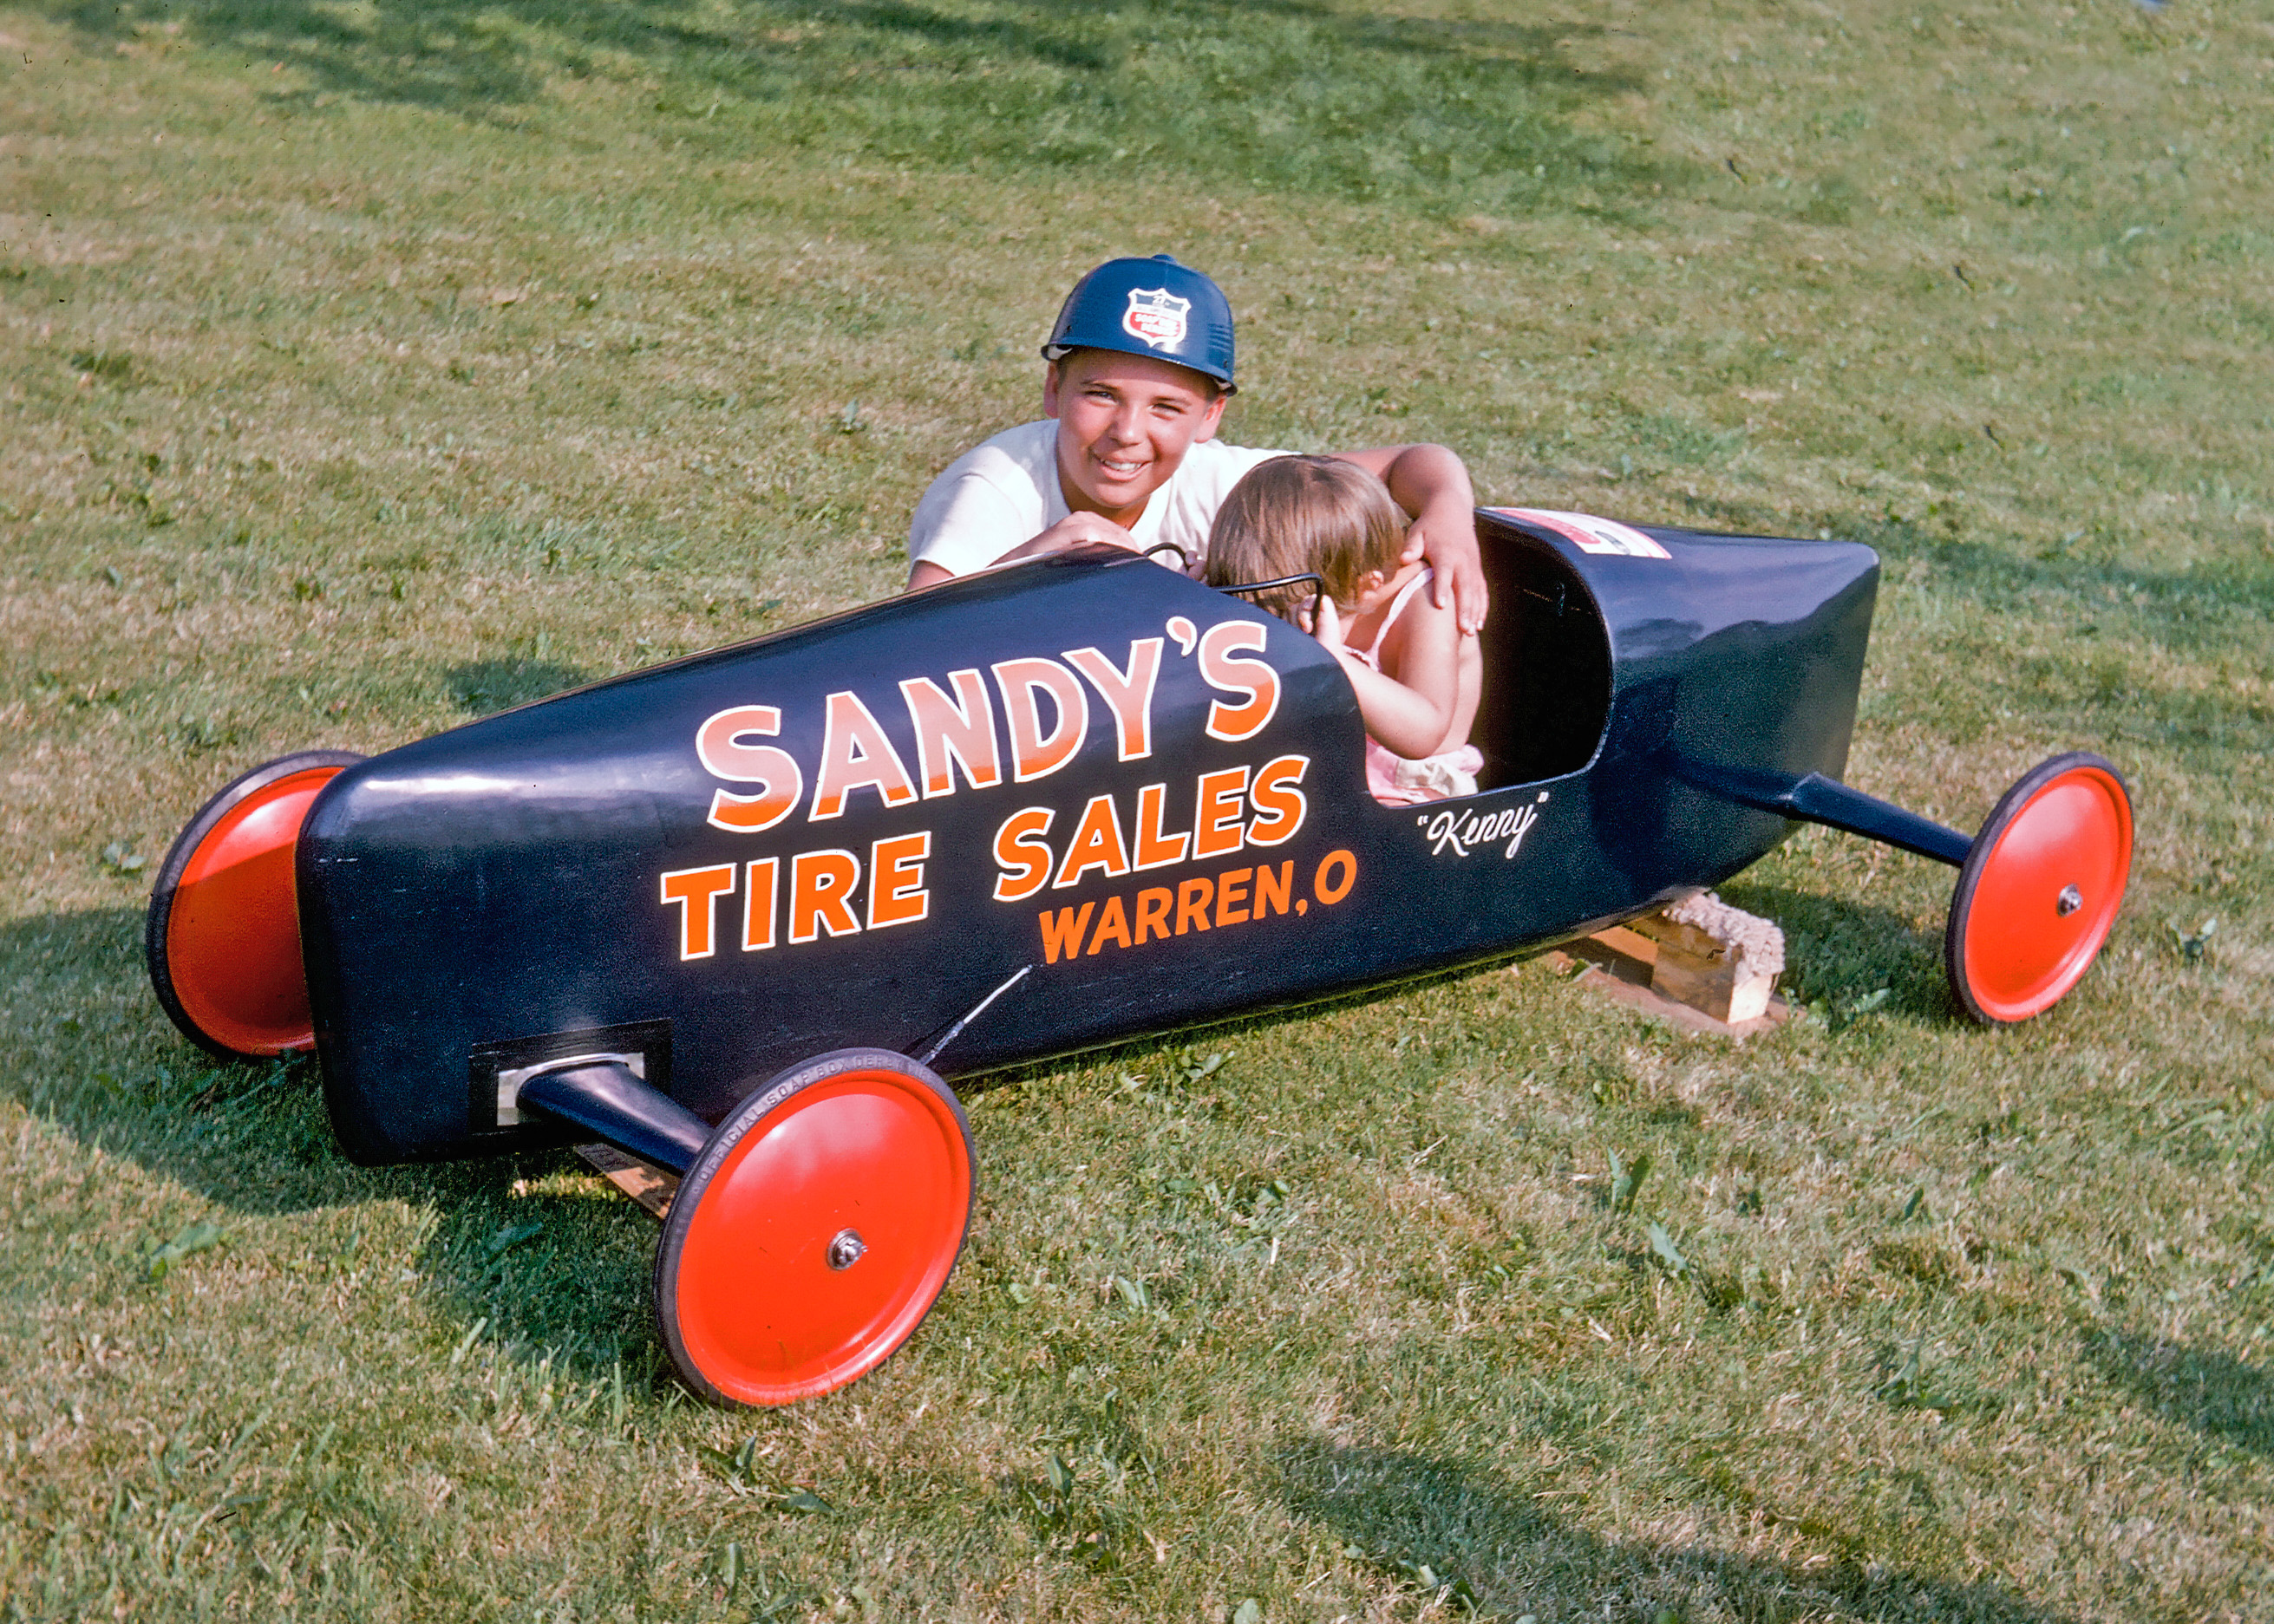 All-American Soap Box Derby in the 1960s